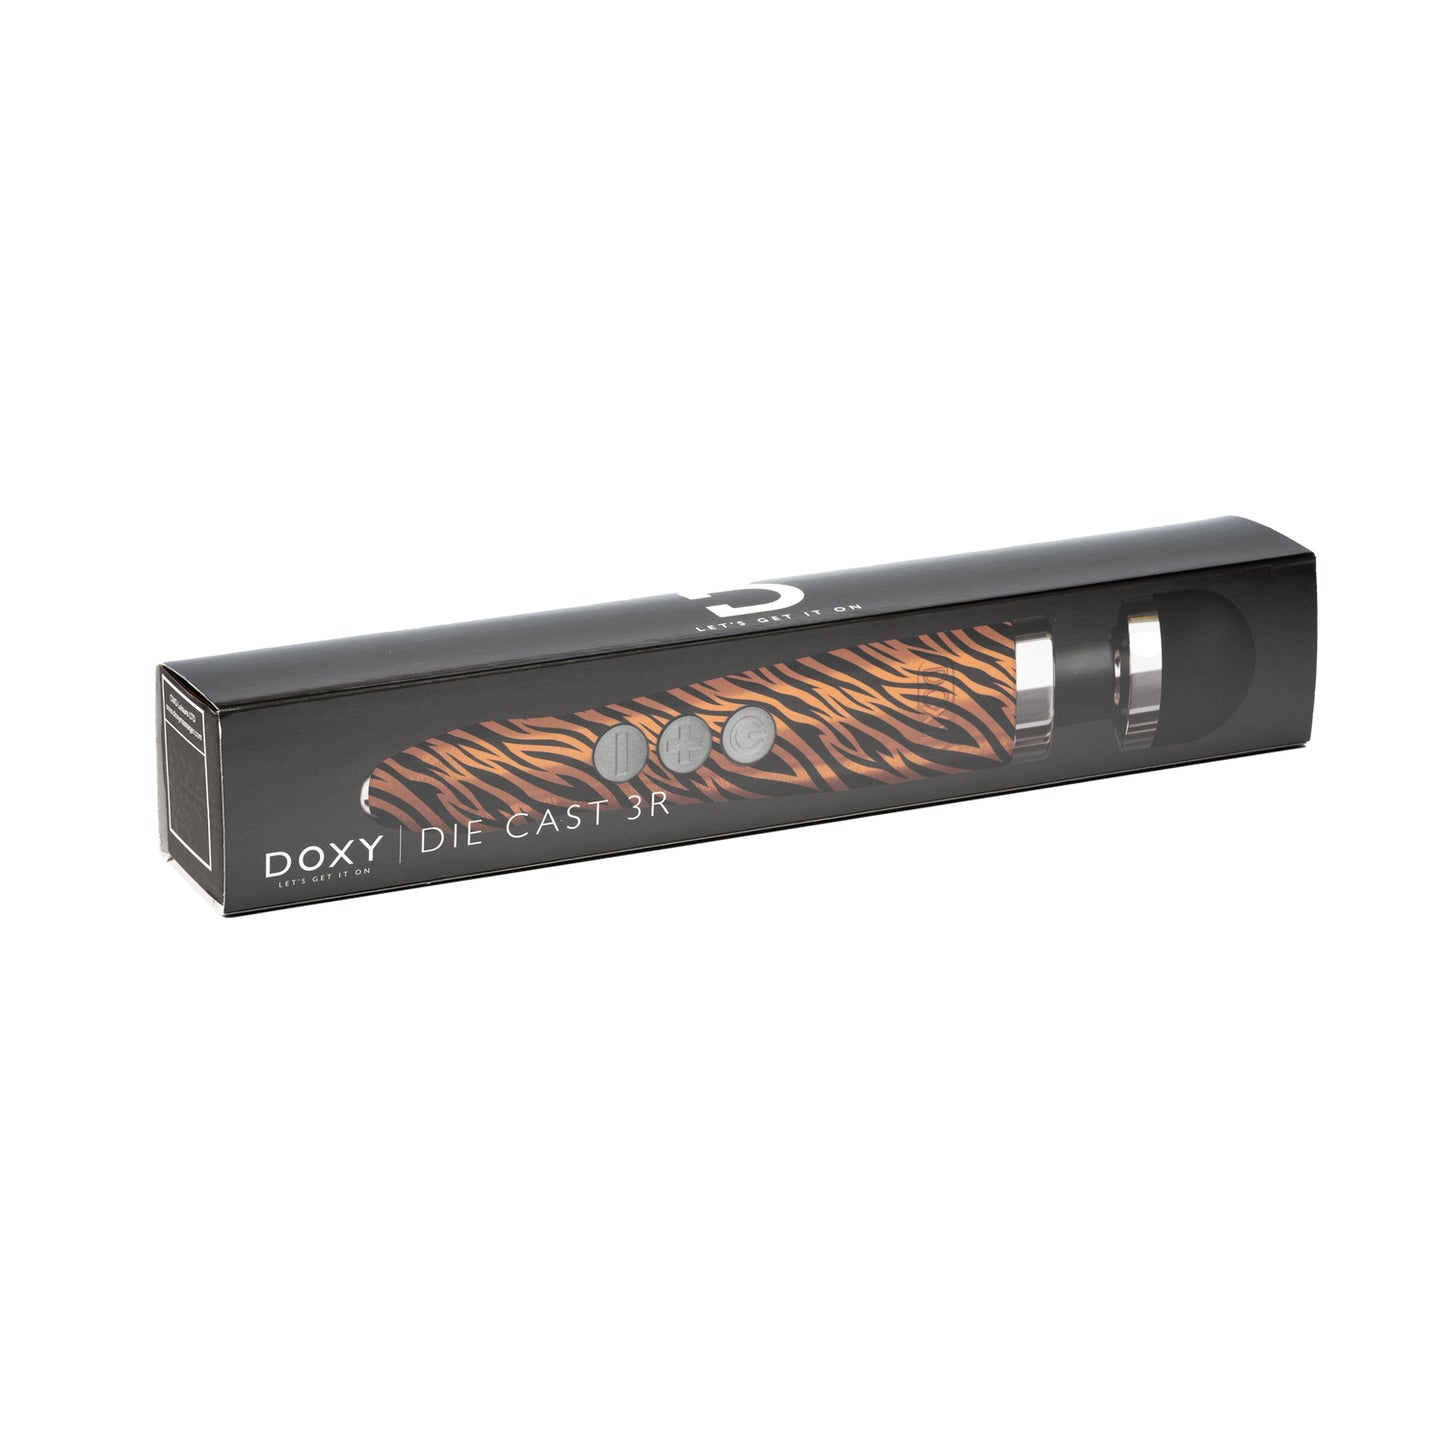 Doxy Die Cast 3 Rechargeable - Tiger